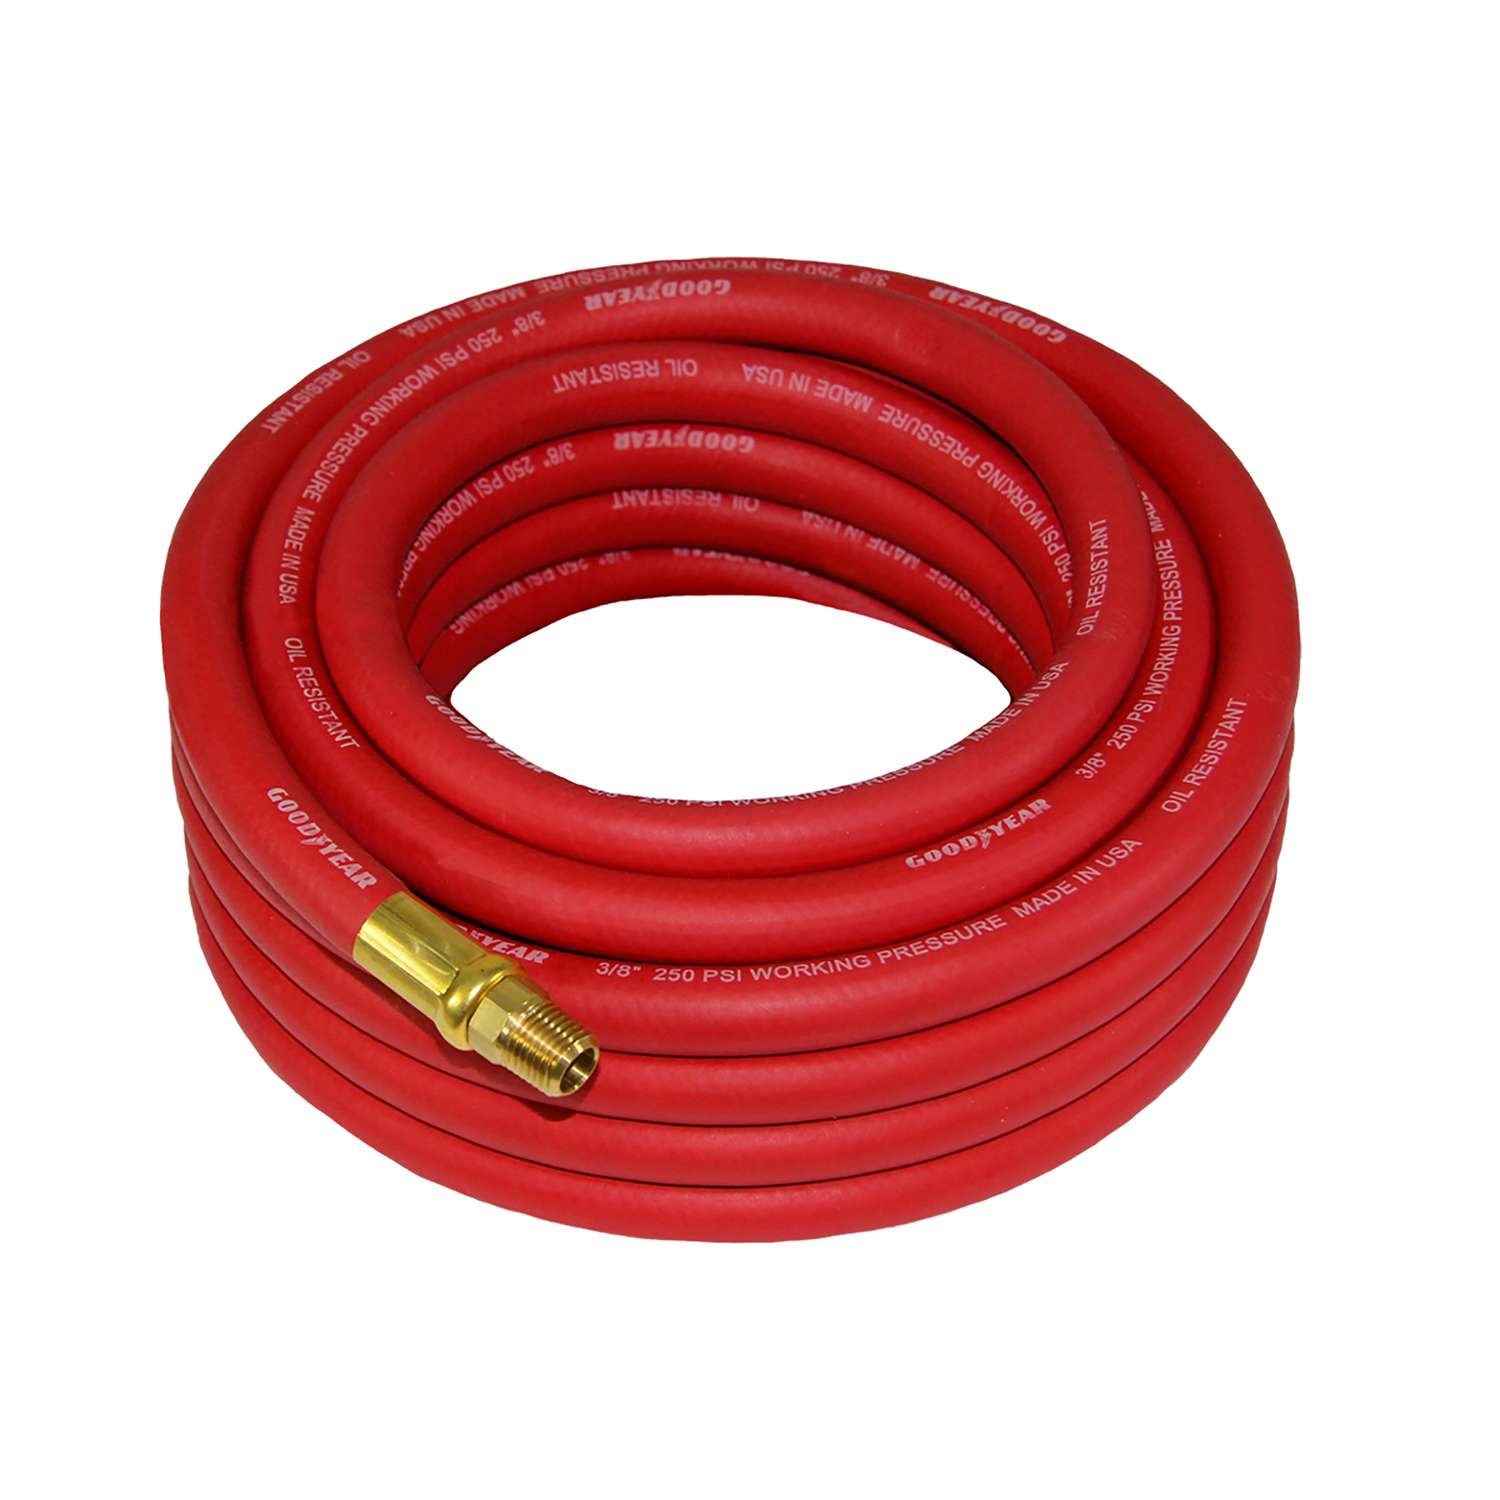 Suction HoseEPDM Rubber3" x 20 FTPin Lug Complete Kit50 FT Red 